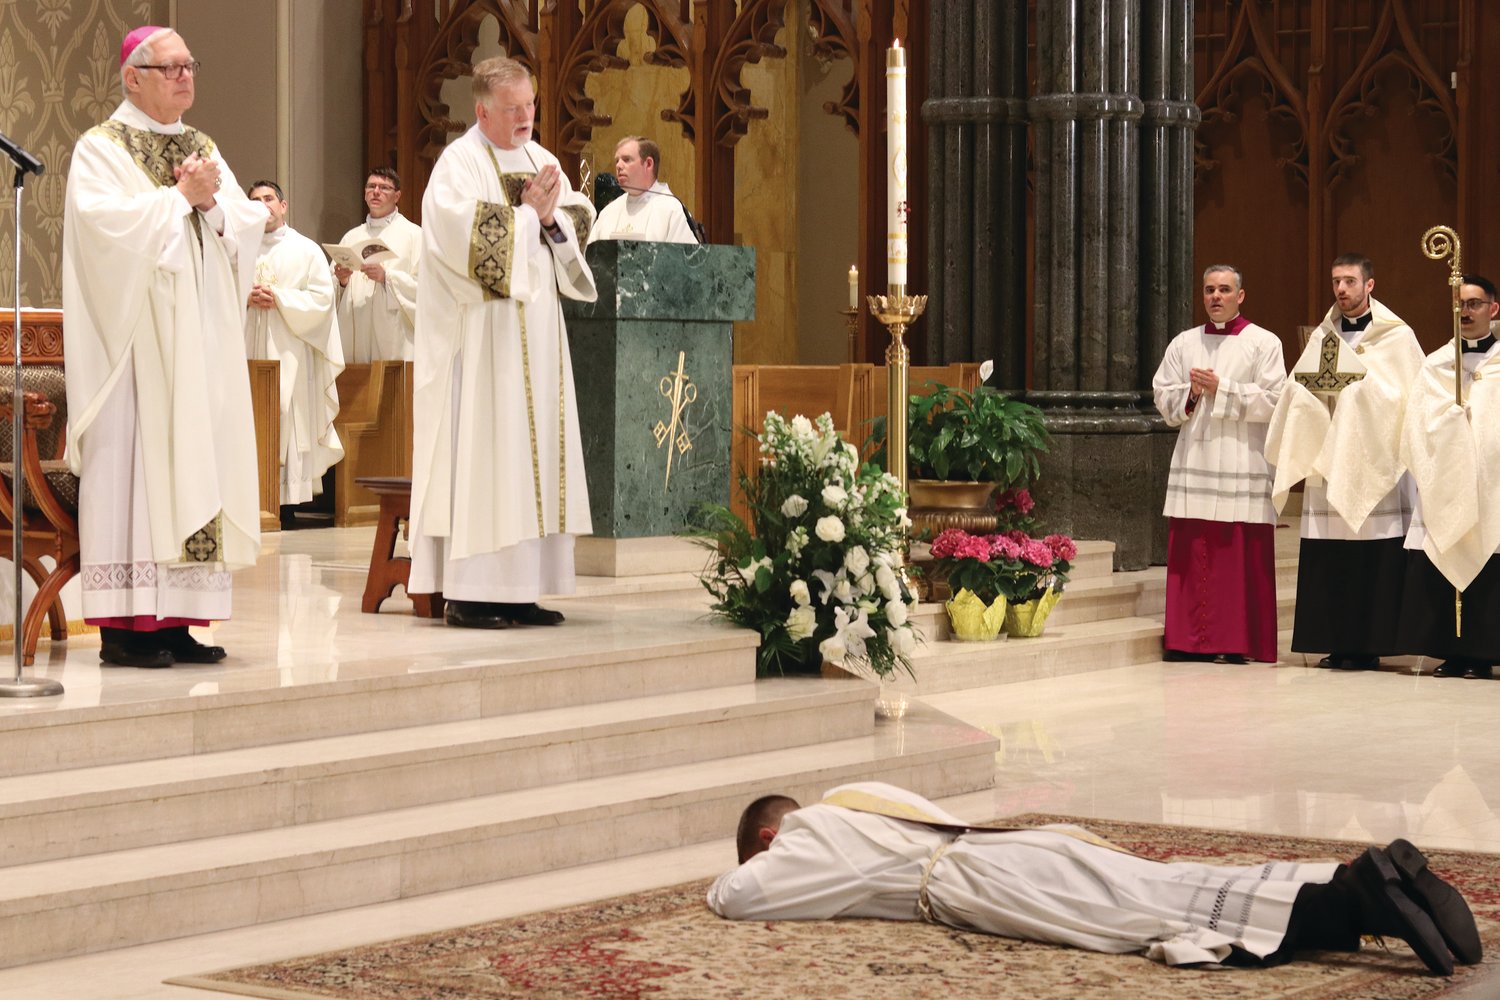 Father Mark Gadoury lays prostrate as the bishop and all gathered pray the Litany of the Saints earlier in the Mass.